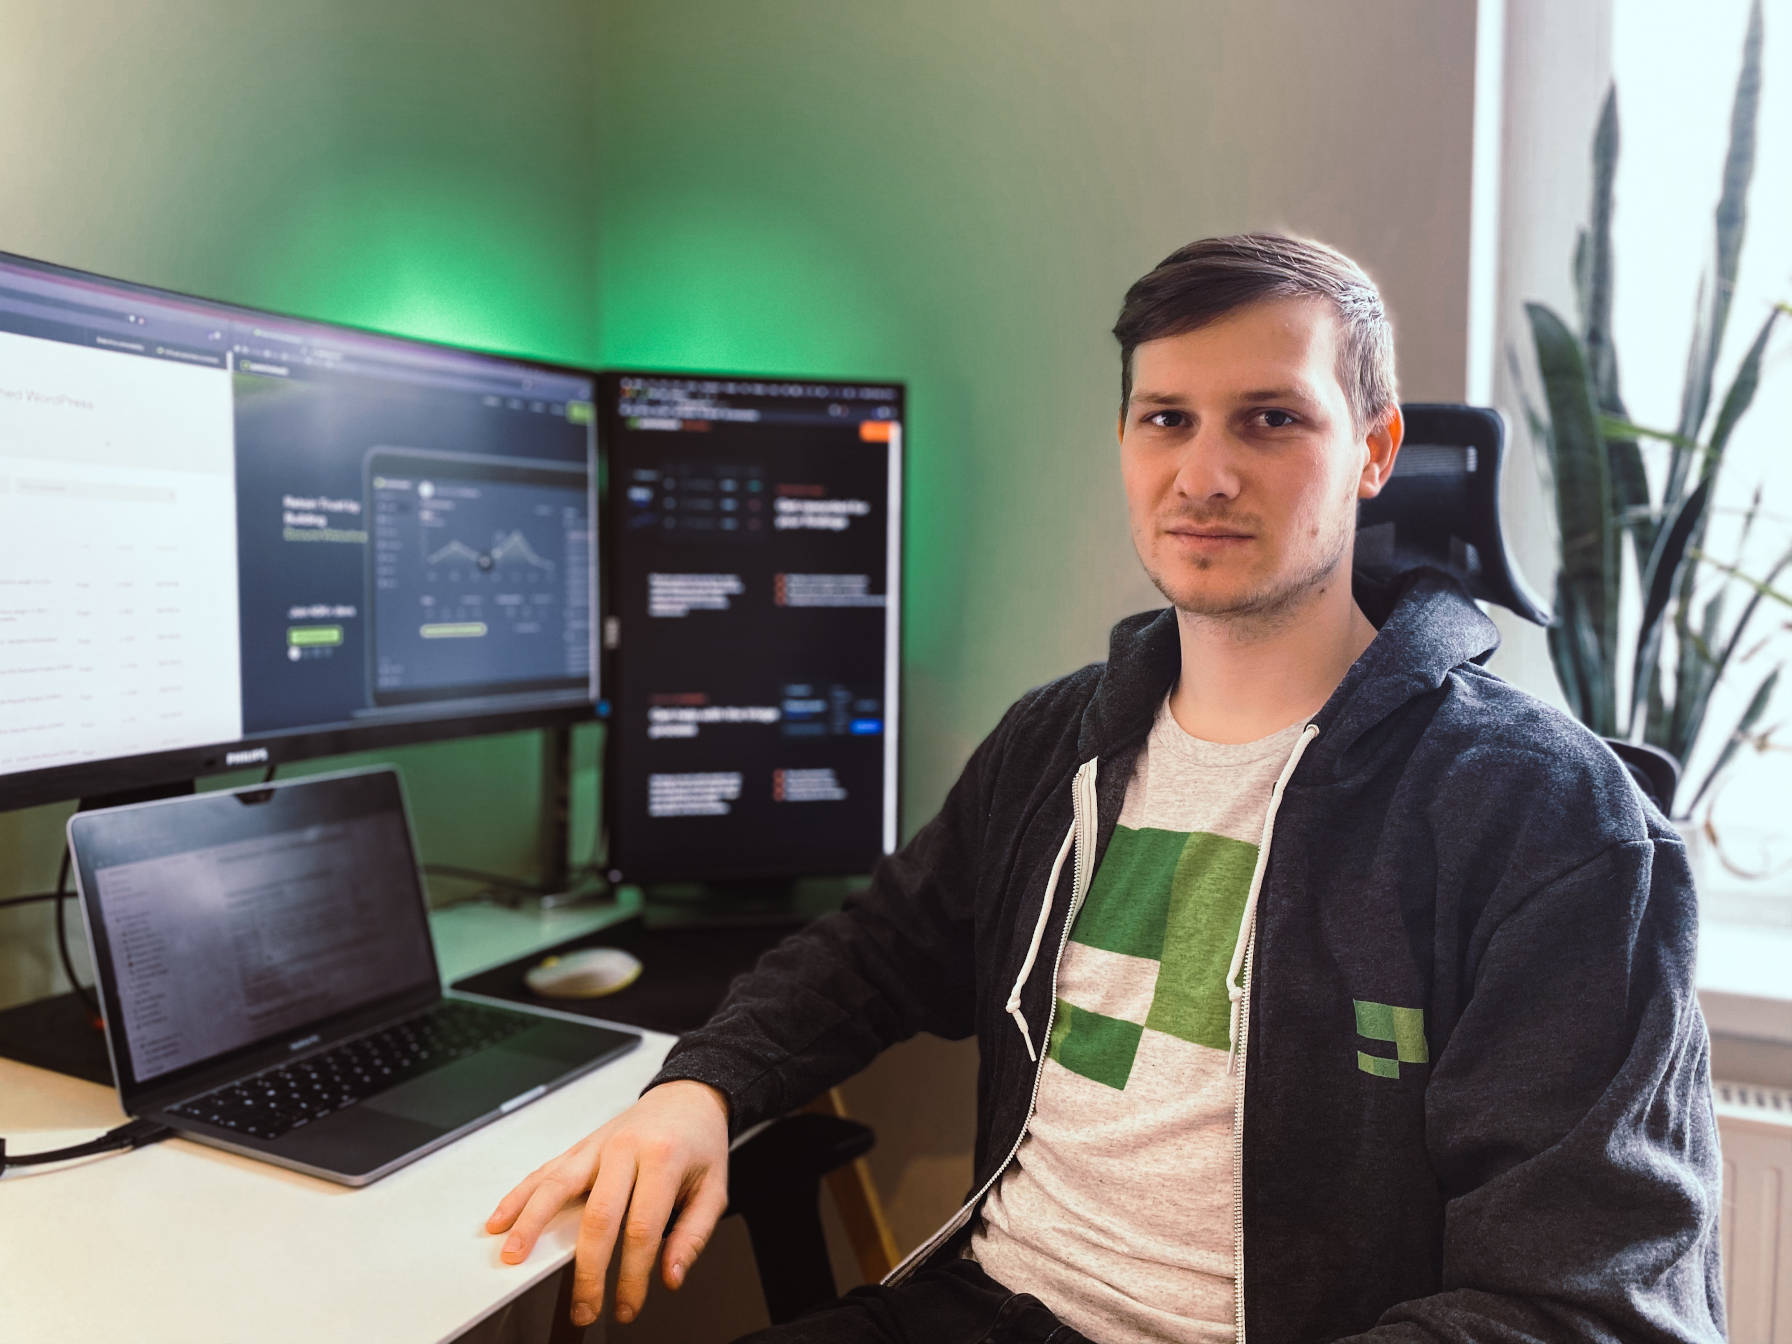 Patchstack founder and CEO, Oliver Sild, sitting at a desk with laptop and monitors.